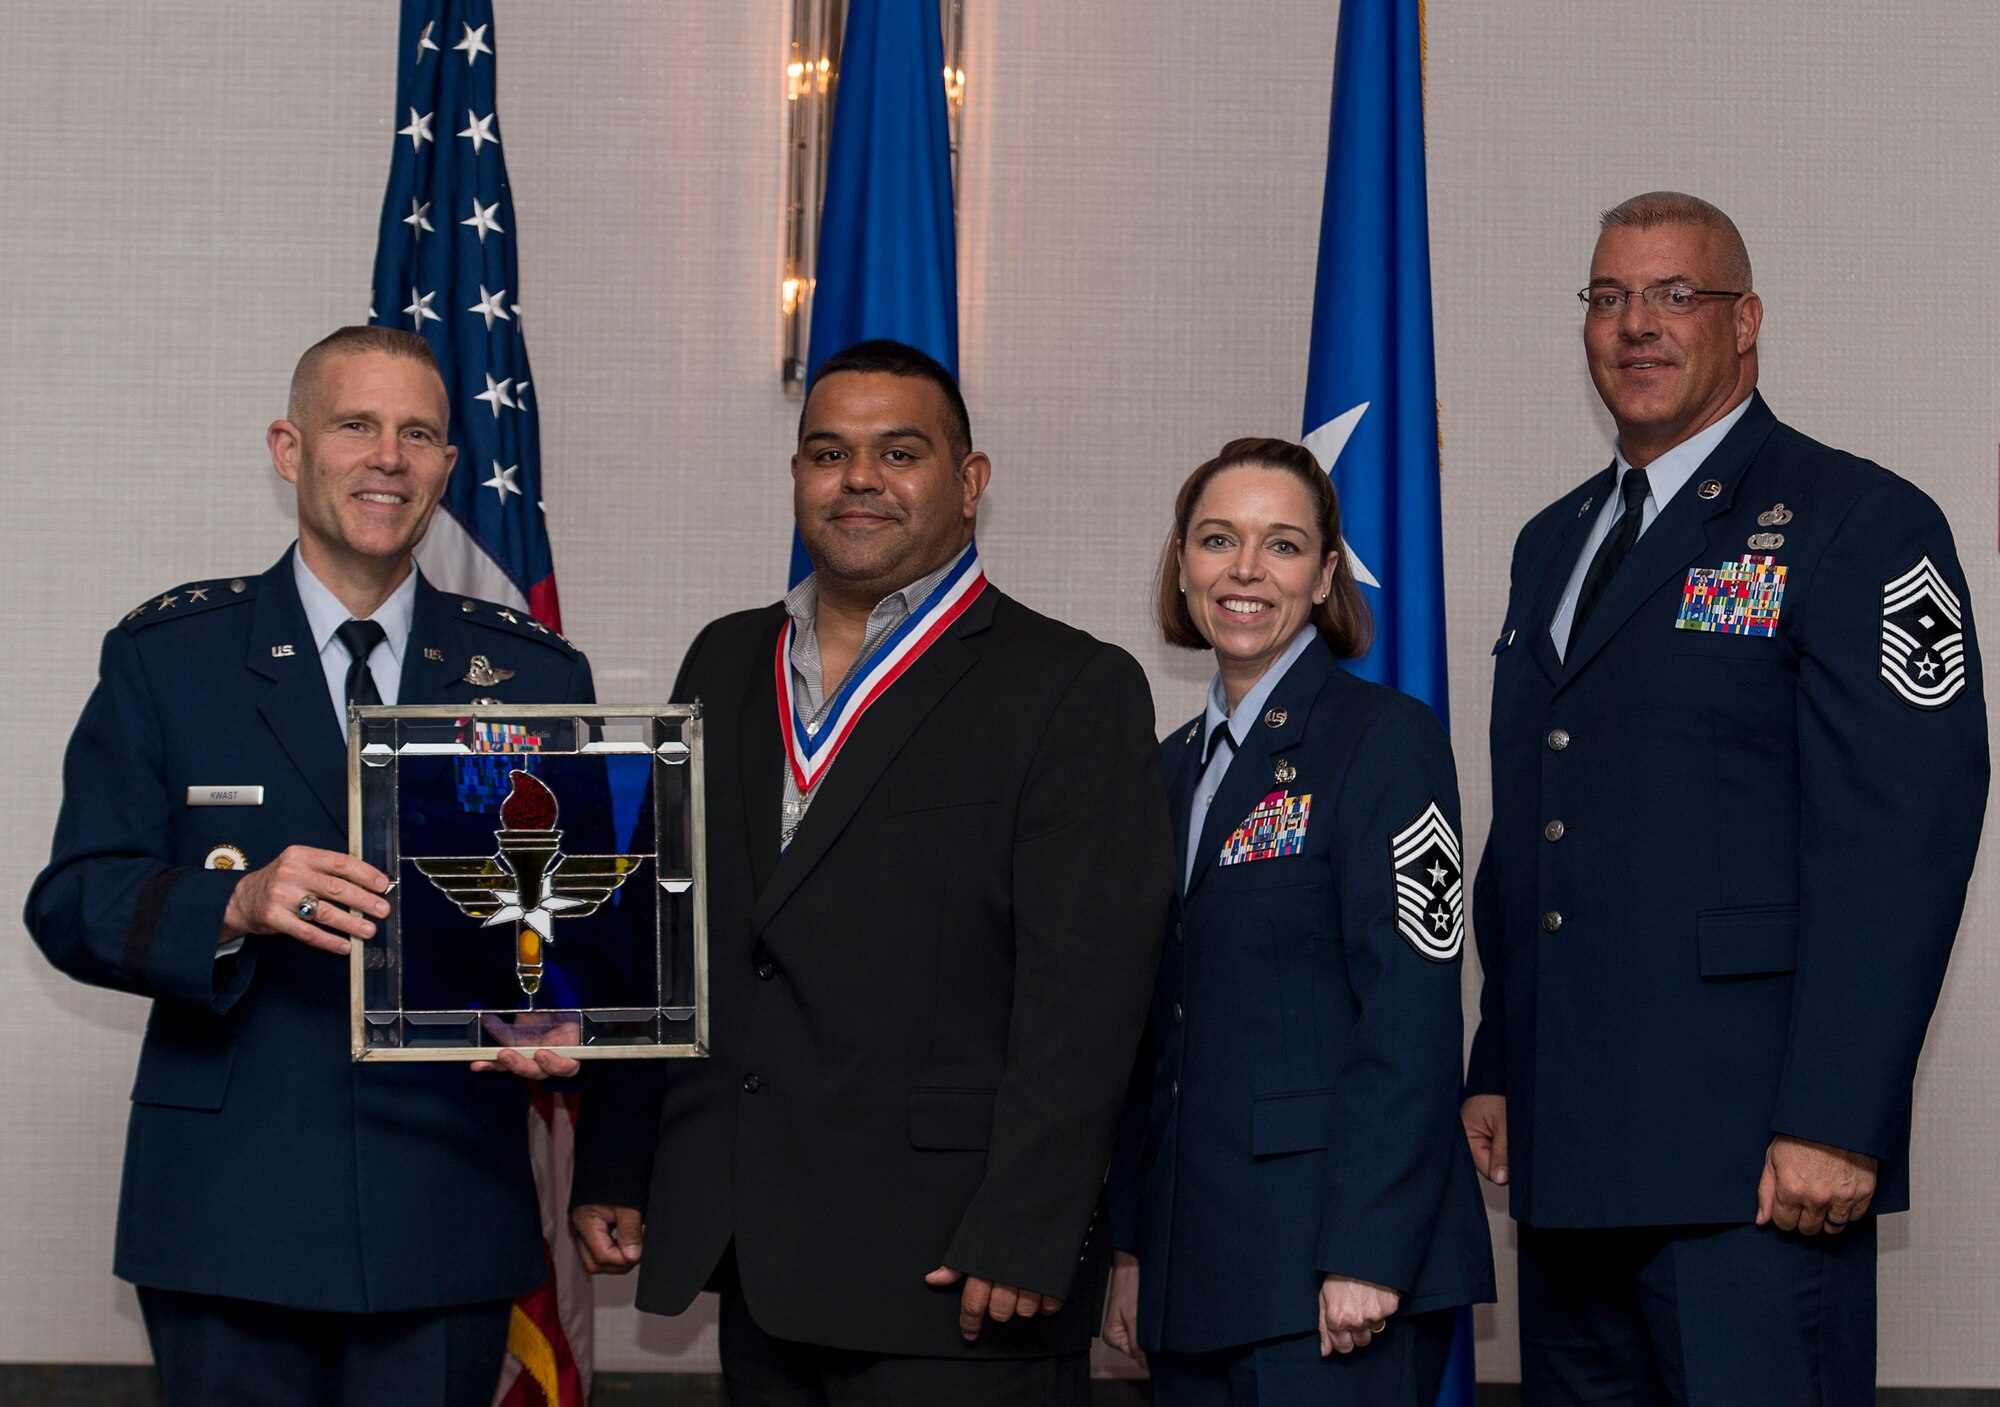 Ramiro Solis, Maintenance Program Supervisor assigned to the 97th Maintenance Group at Altus Air Force Base, Oklahoma, receives the 2017 Supervisory Civilian of the Year Award from Lt. Gen. Steve Kwast, Commander of Air Education and Training Command, during the AETC 12 Outstanding Airmen of the Year Awards banquet, Feb. 22, 2018, in Orlando, Fla. Solis executed $9.2 million KC-46 Pegasus support equipment, which processed 1,874 pieces and guaranteed the Wing’s new mission success, identified a critical KC-46 potable water shortfall with a solution that was implemented fleet-wide, and orchestrated a city-wide fundraiser to replace the youth softball and safety equipment, raising $3,500 and providing for 80 children. (U.S. Air Force photo by Staff Sgt. Kenneth W. Norman)